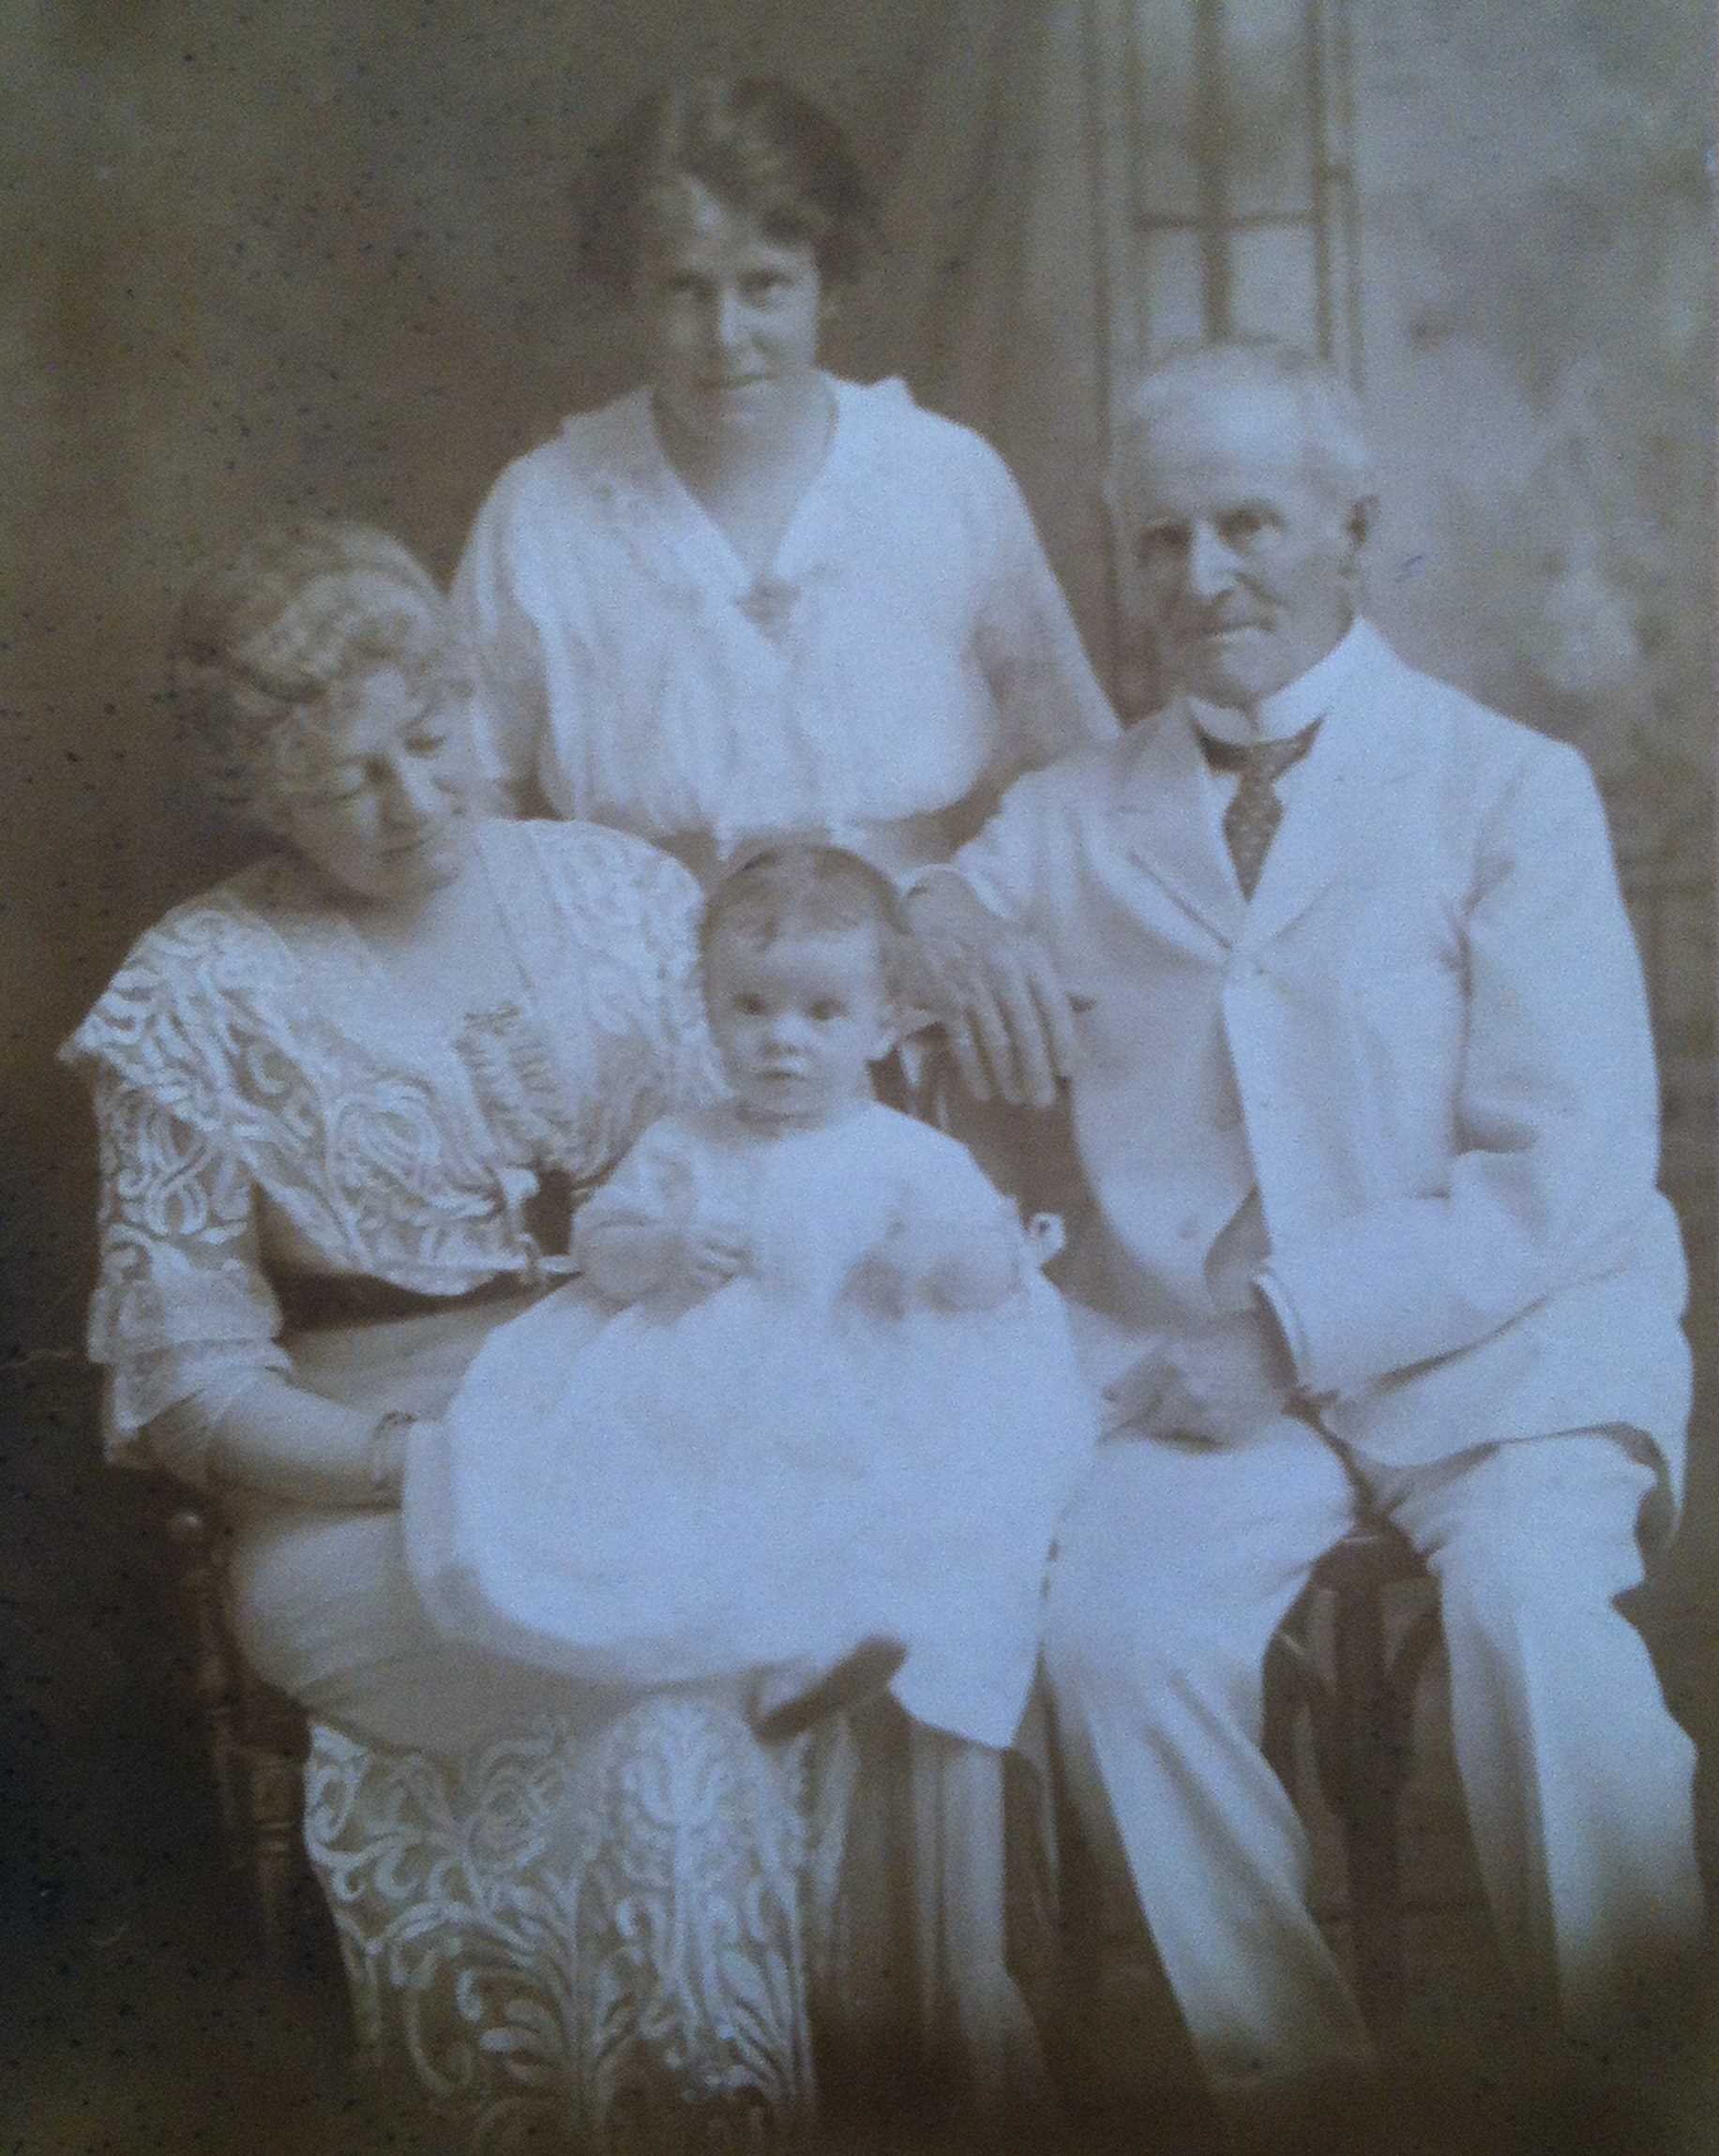 Black and white portrait of the family, sitting.